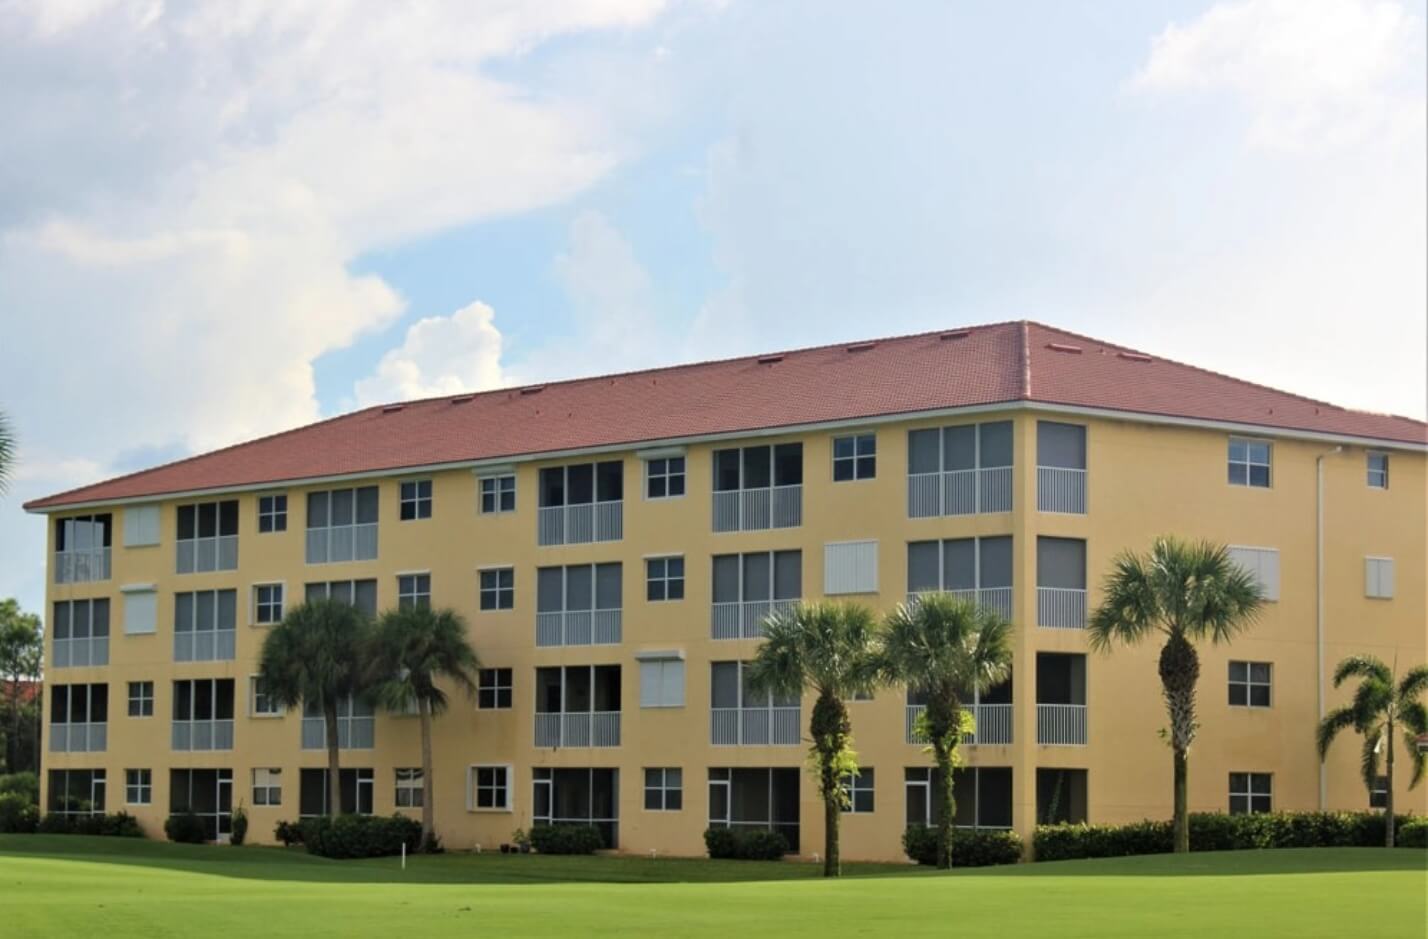 Red Tile roof on a large, yellow apartment building in Southwest Florida